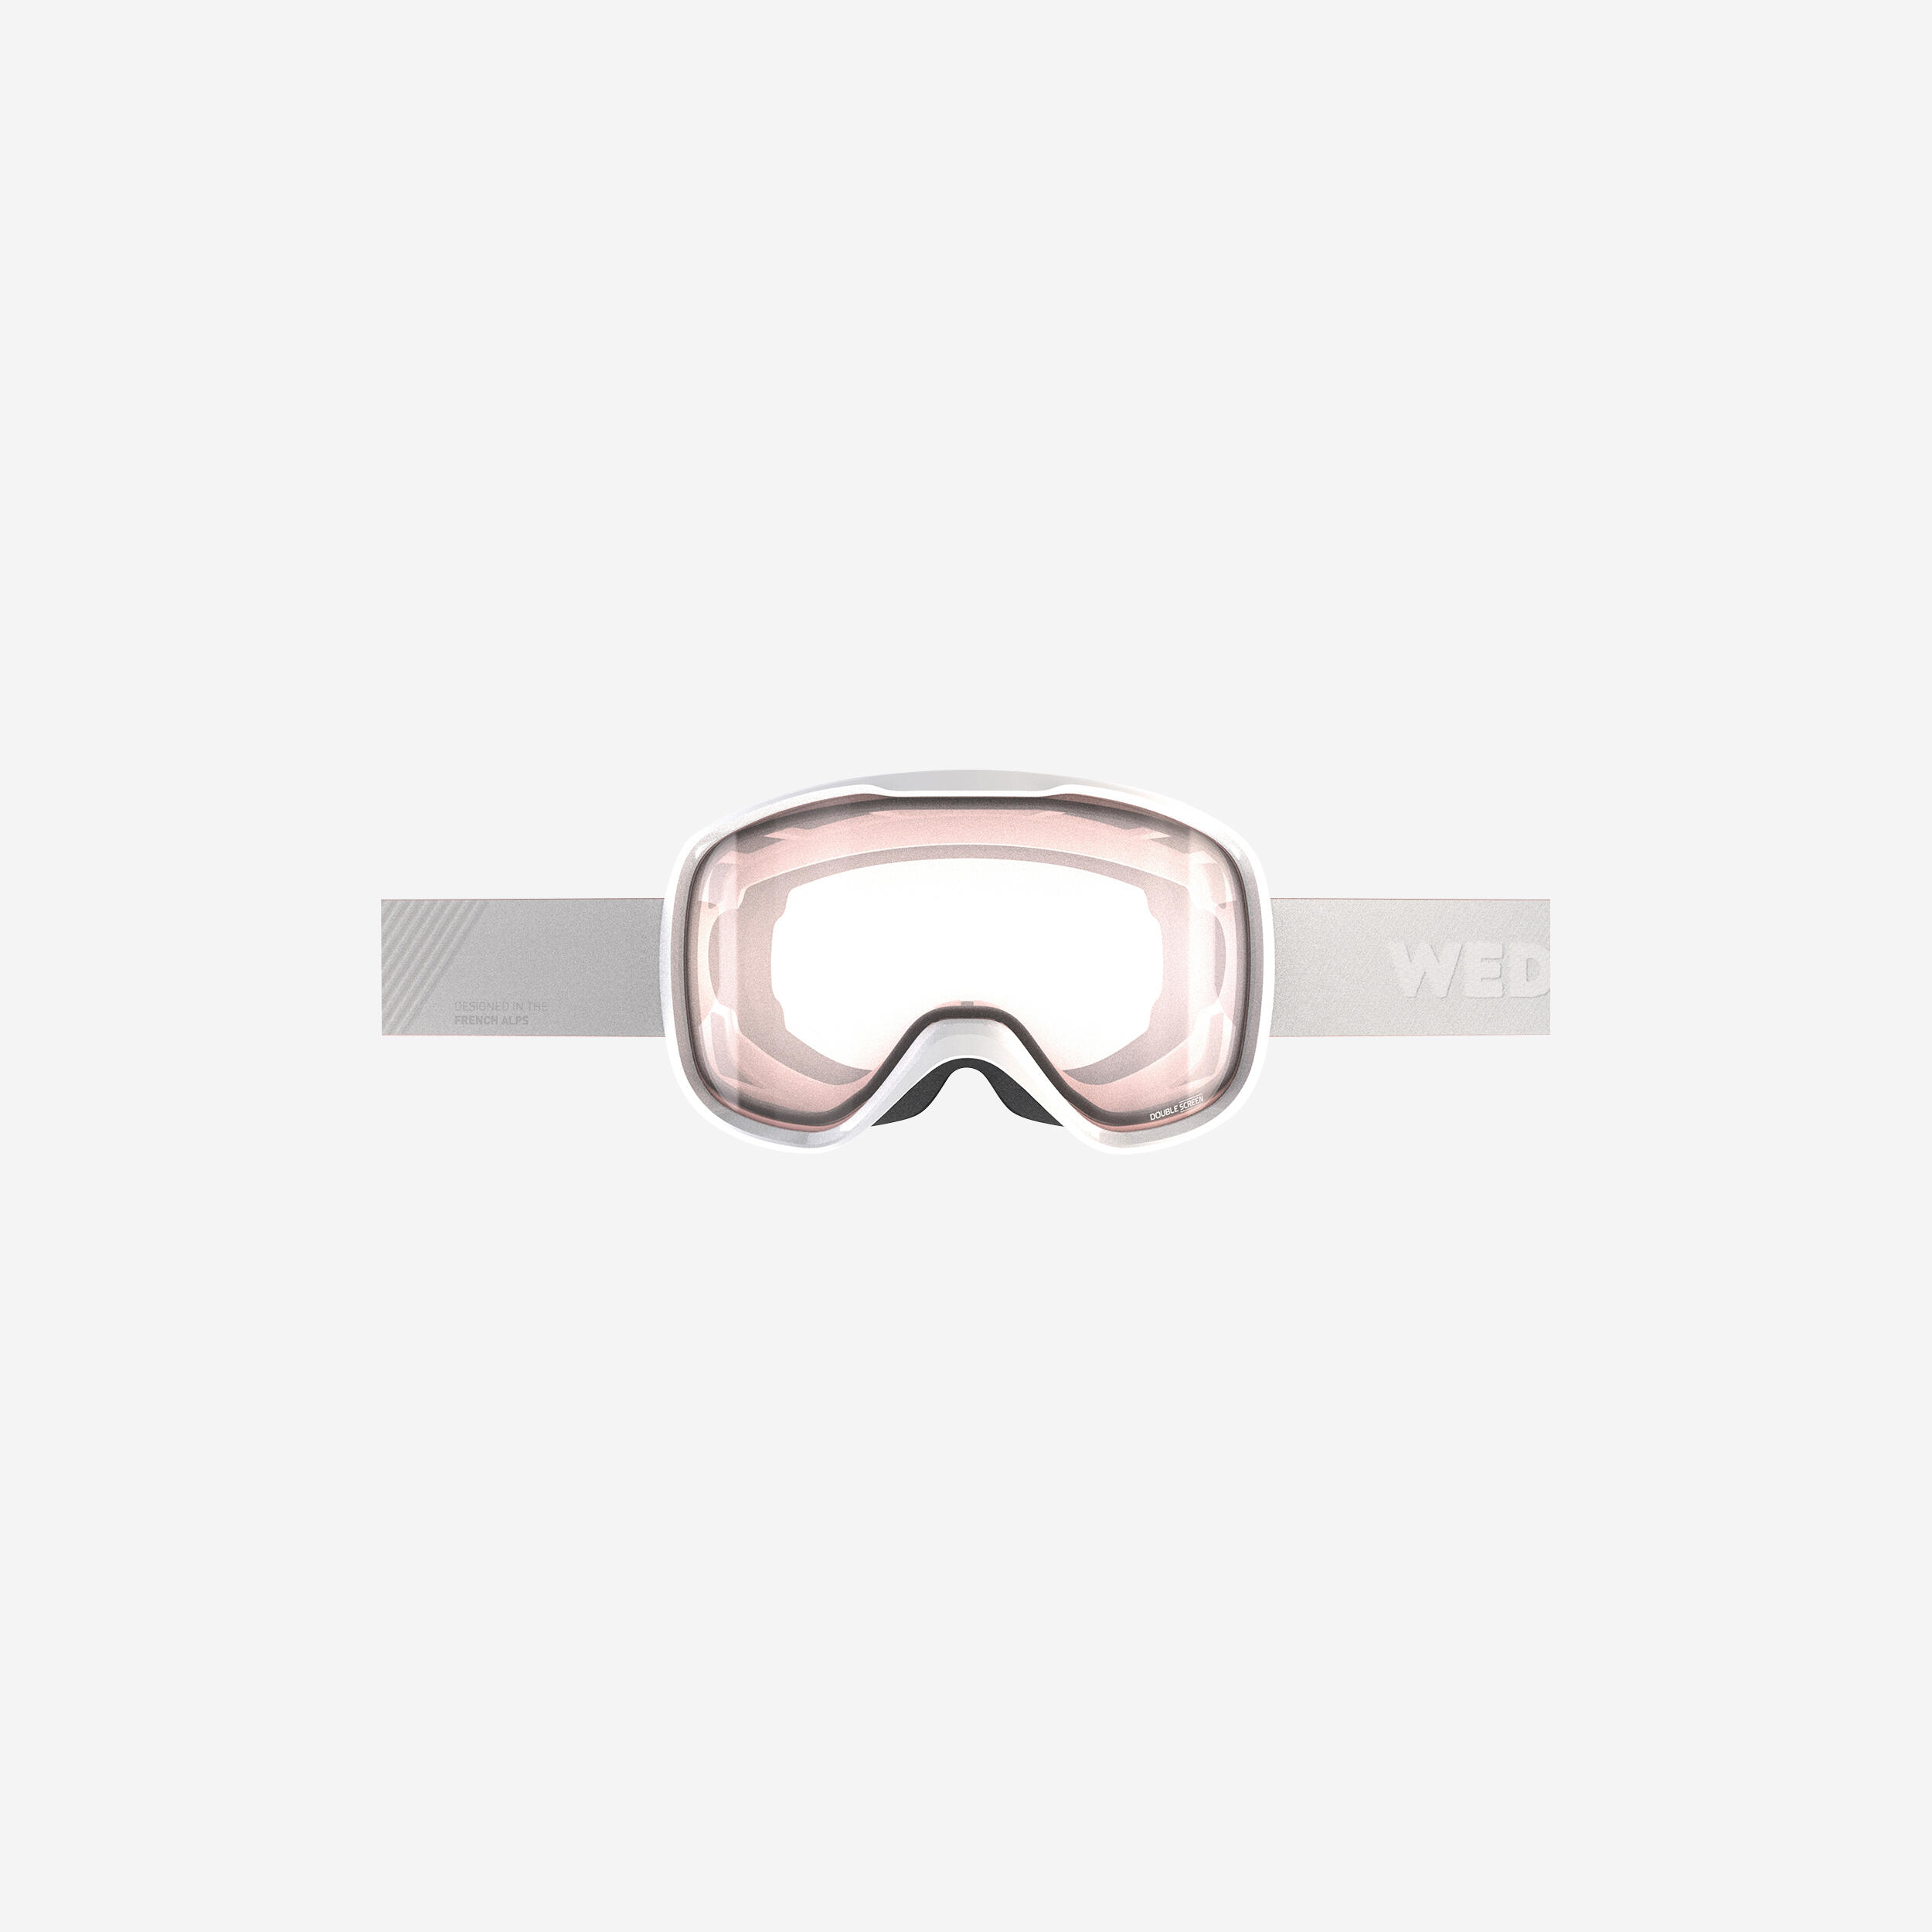 WEDZE KIDS’ AND ADULT SKIING AND SNOWBOARDING GOGGLES - G 500 S1 -  WHITE PINK